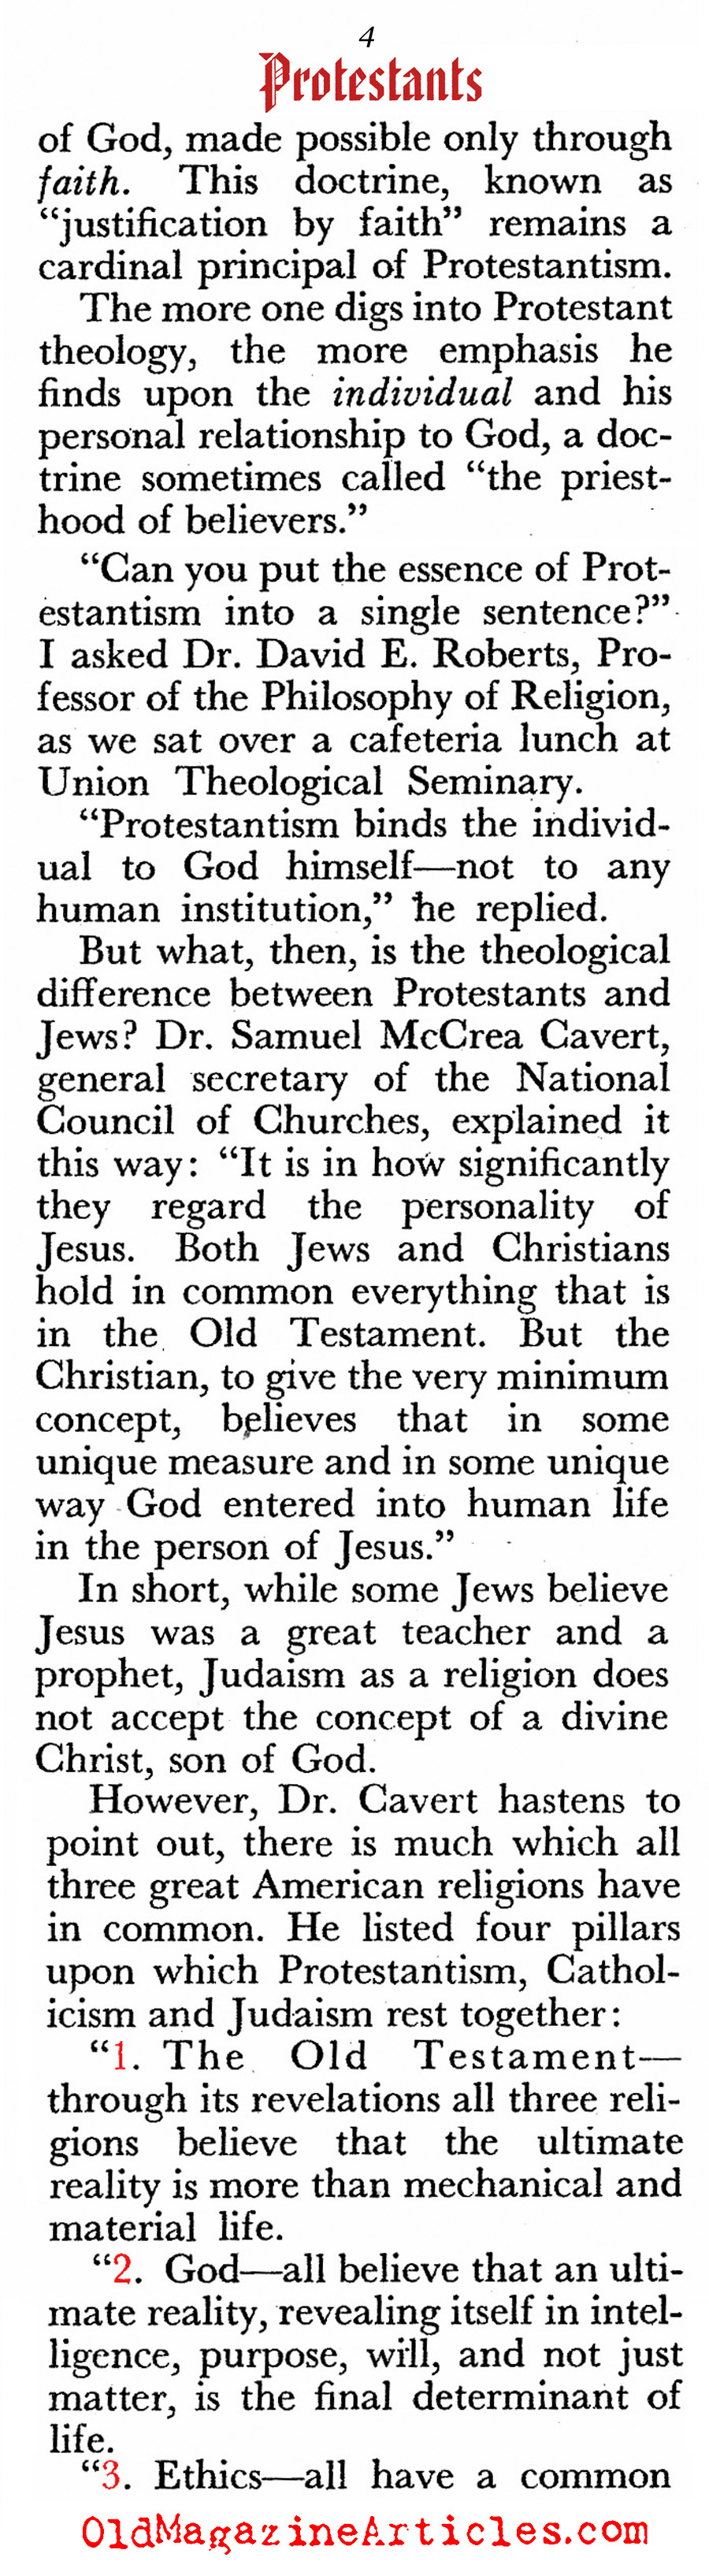 Protestants in America (Pageant Magazine, 1952)